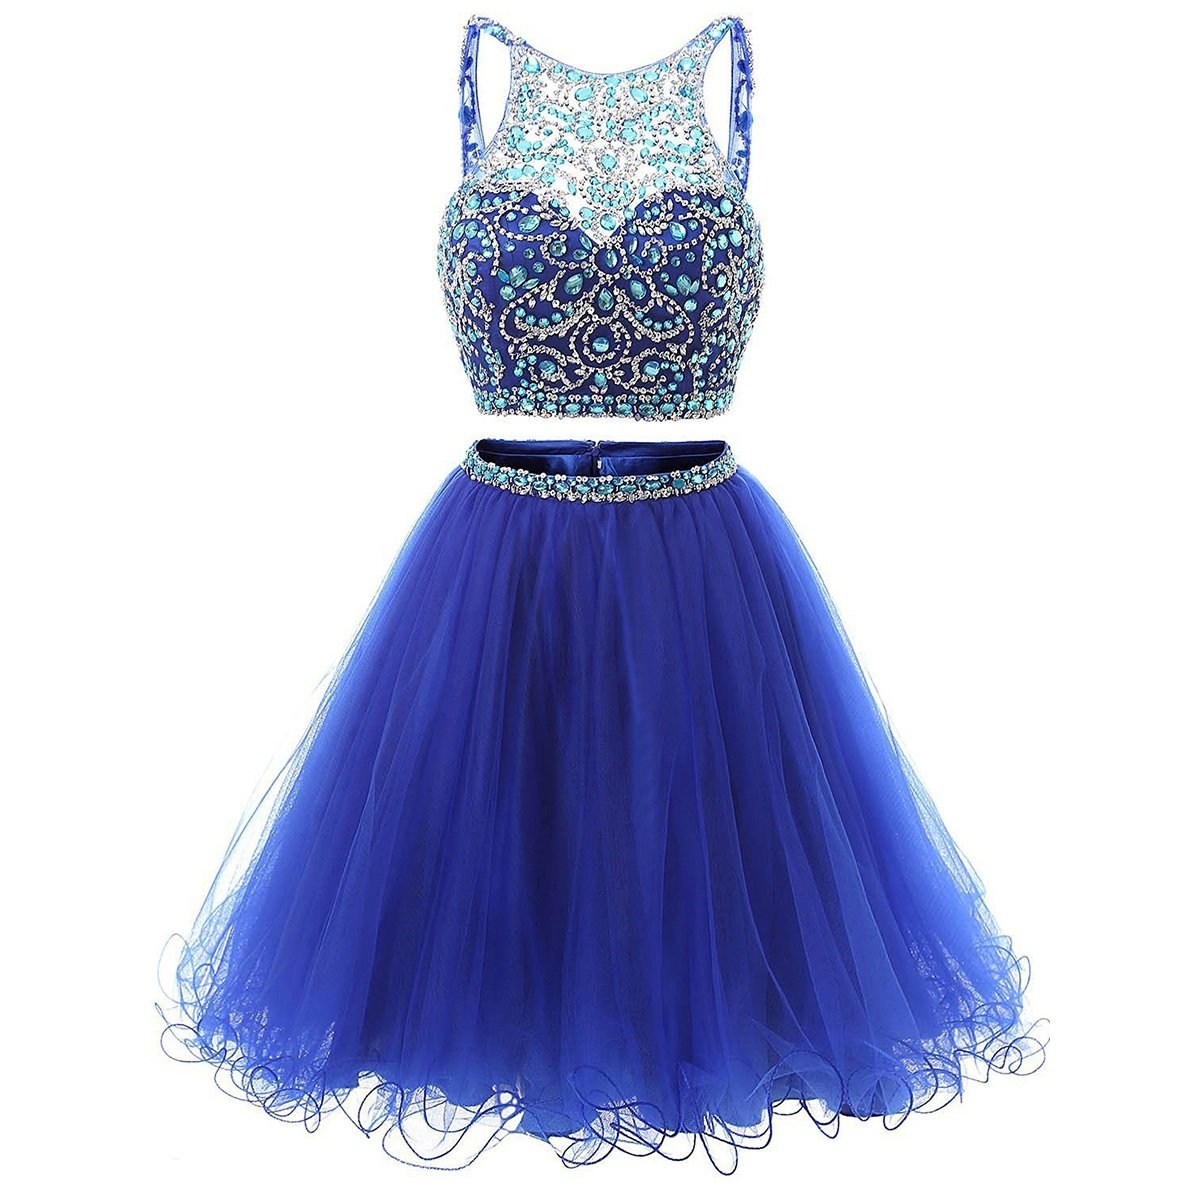 Jewel Neck Illusion Sequins Crystal Shining Two Piece Low Back Royal Blue Tulle Homecoming Dress JS877